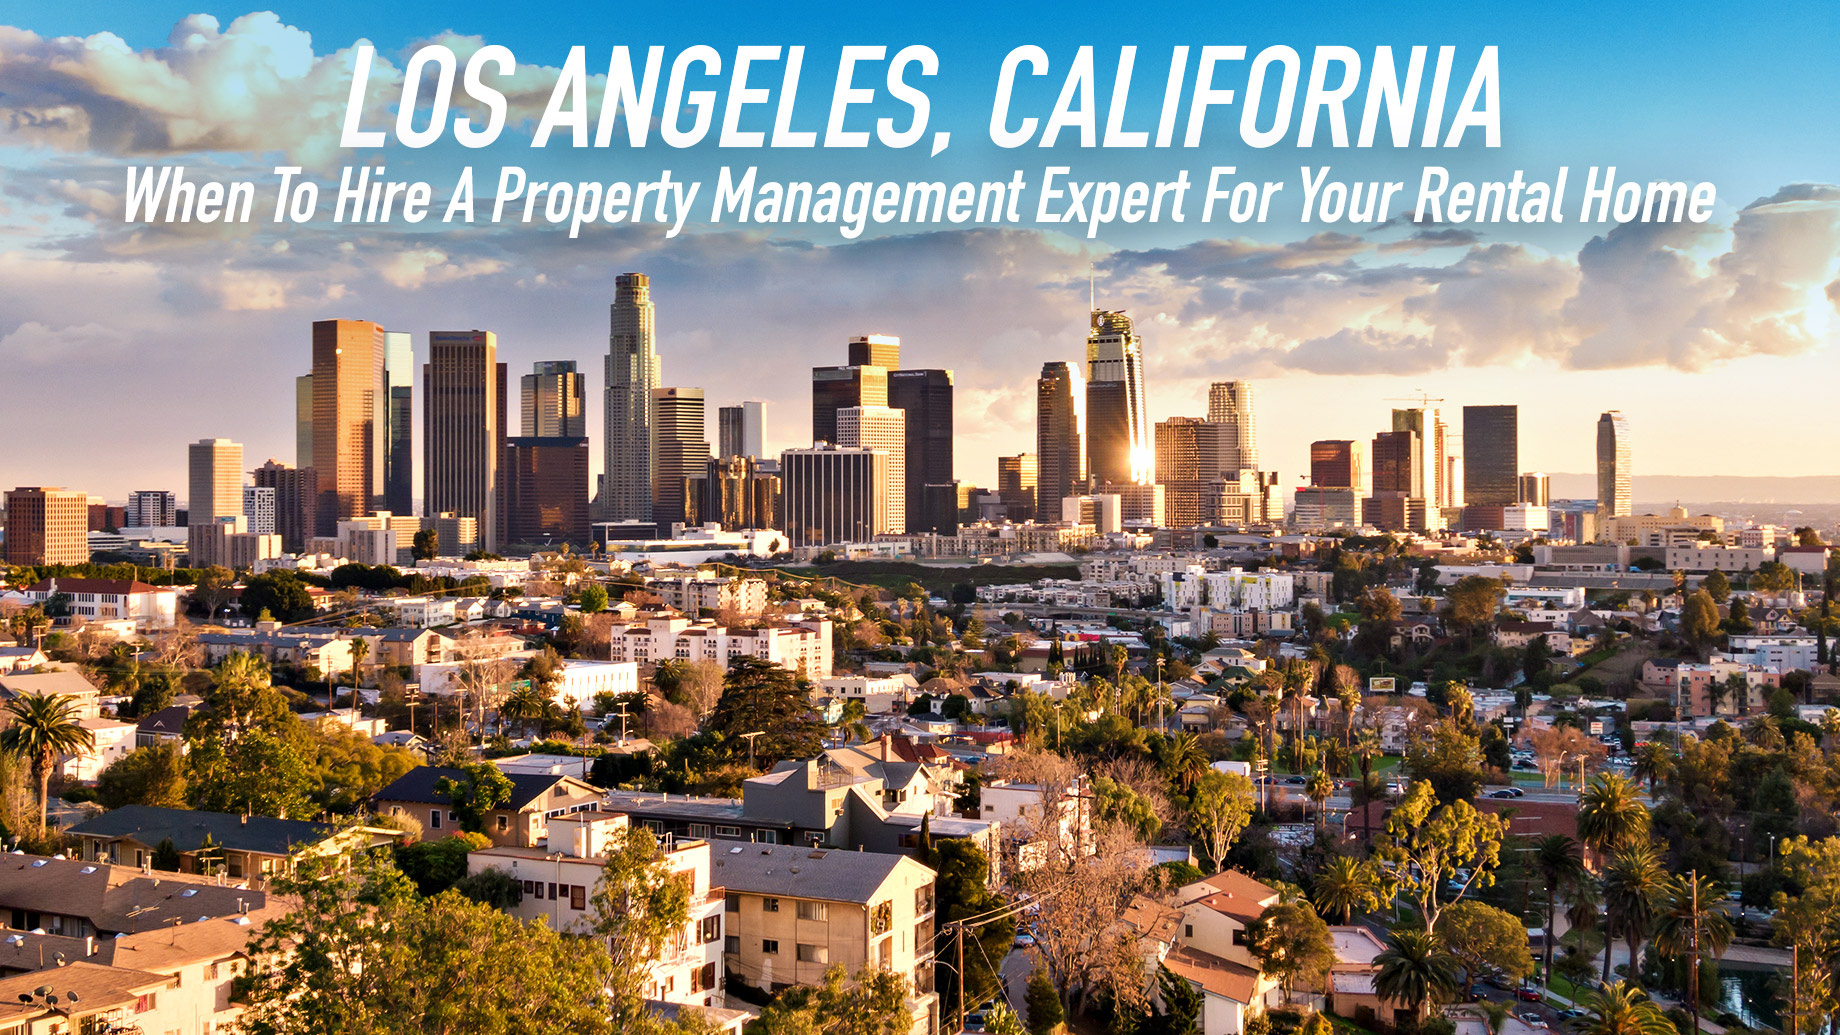 When To Hire A Property Management Expert For Your Rental Home In Los Angeles, California